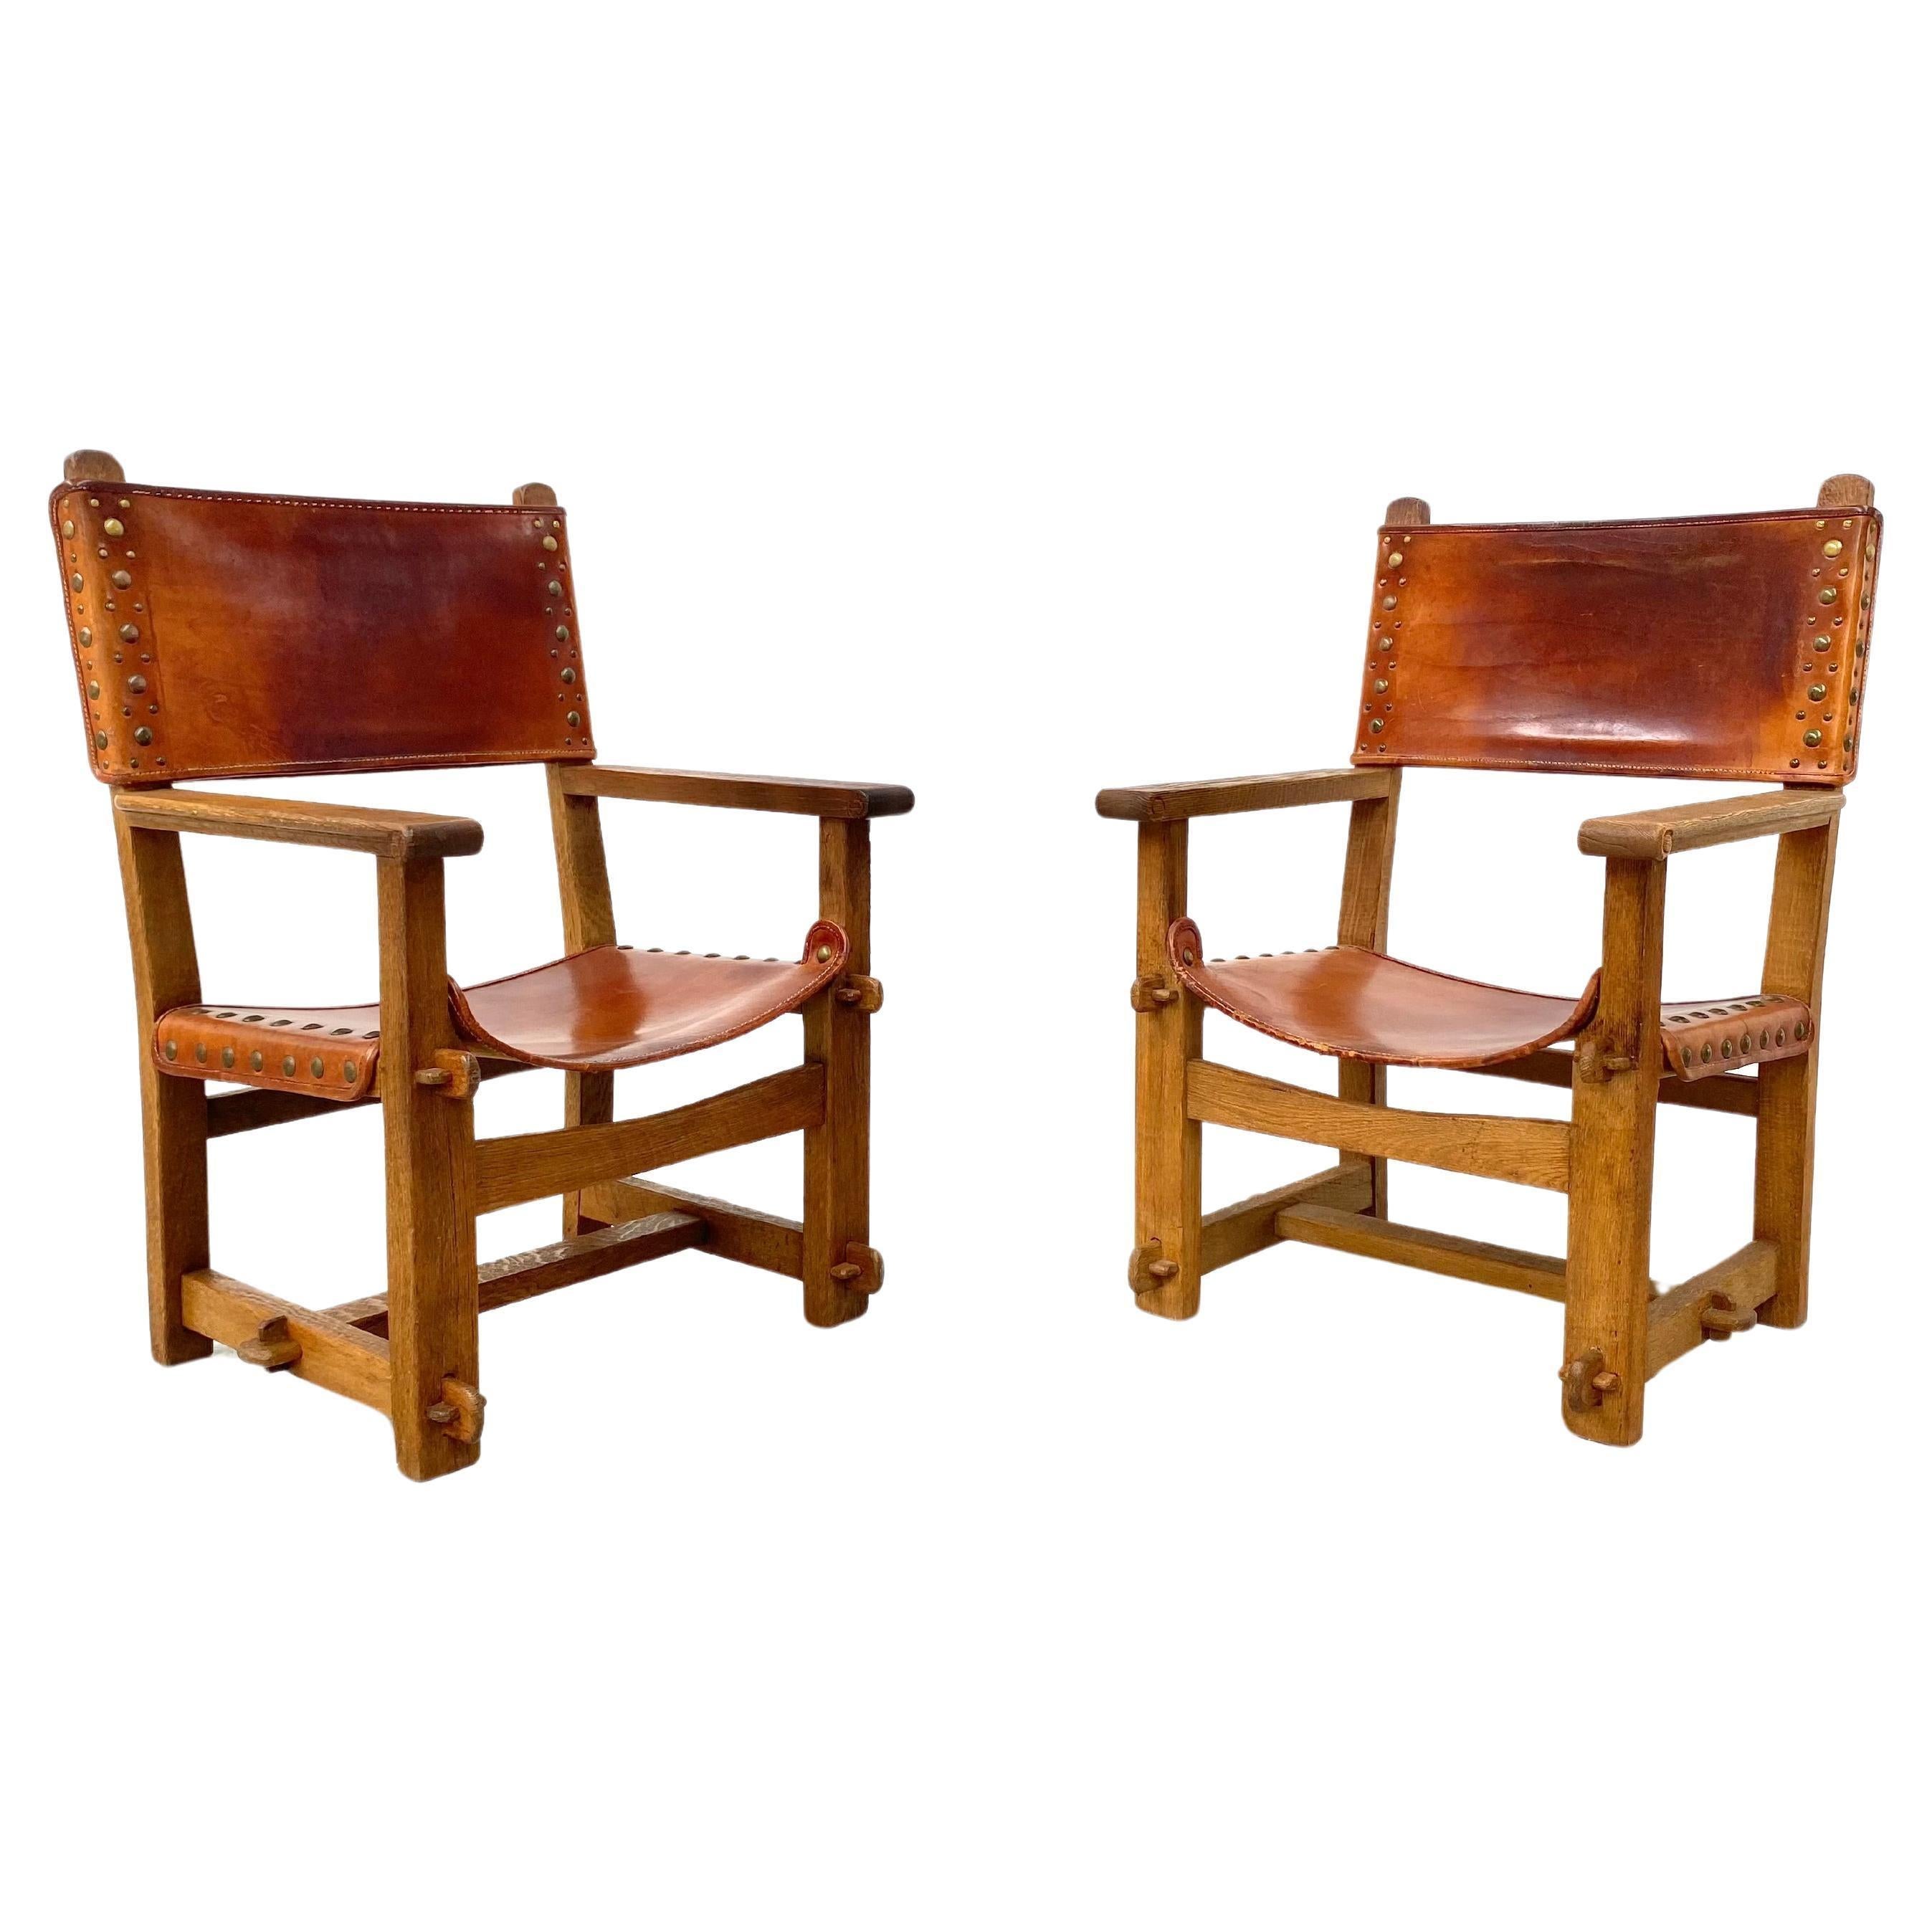 French Provincial Antique French Handmade Brutalist Oak & Cognac Leather Castle Chairs, 1920s. For Sale